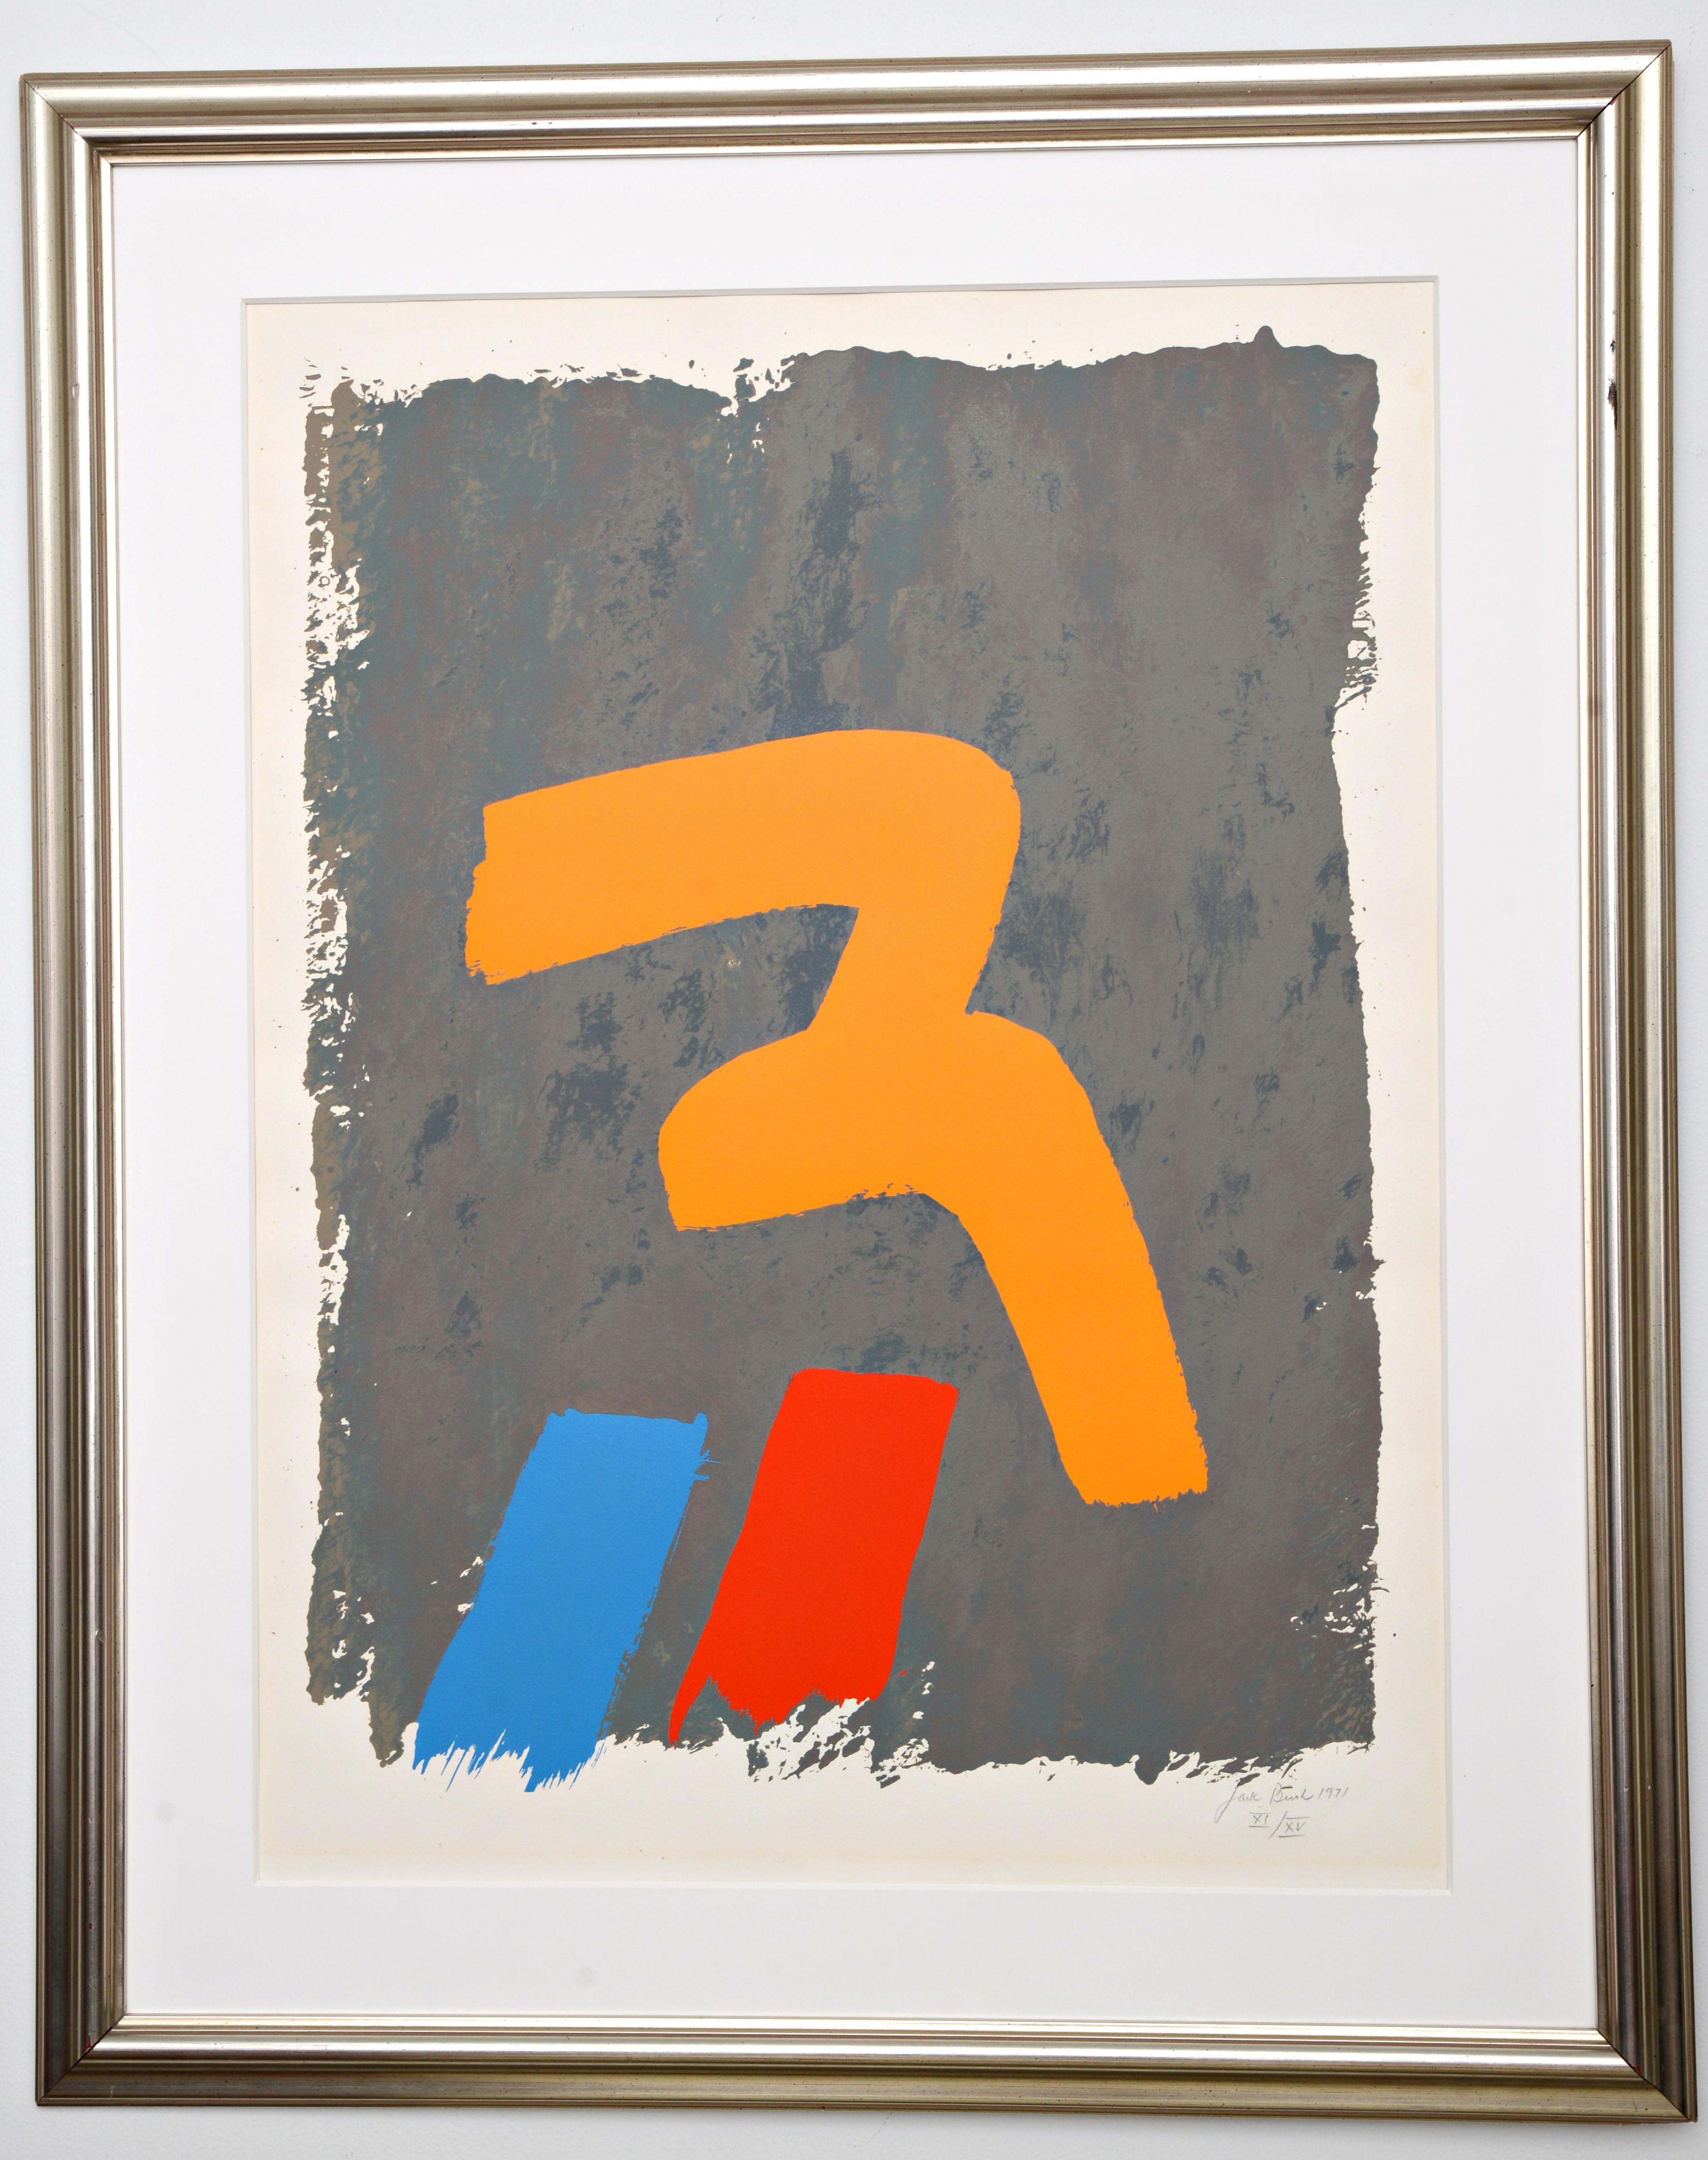 Jack Bush (Canadian 1909-1977)
Color silkscreen on paper
Signed and dated 1971 in pencil
Sheet size: 33.75